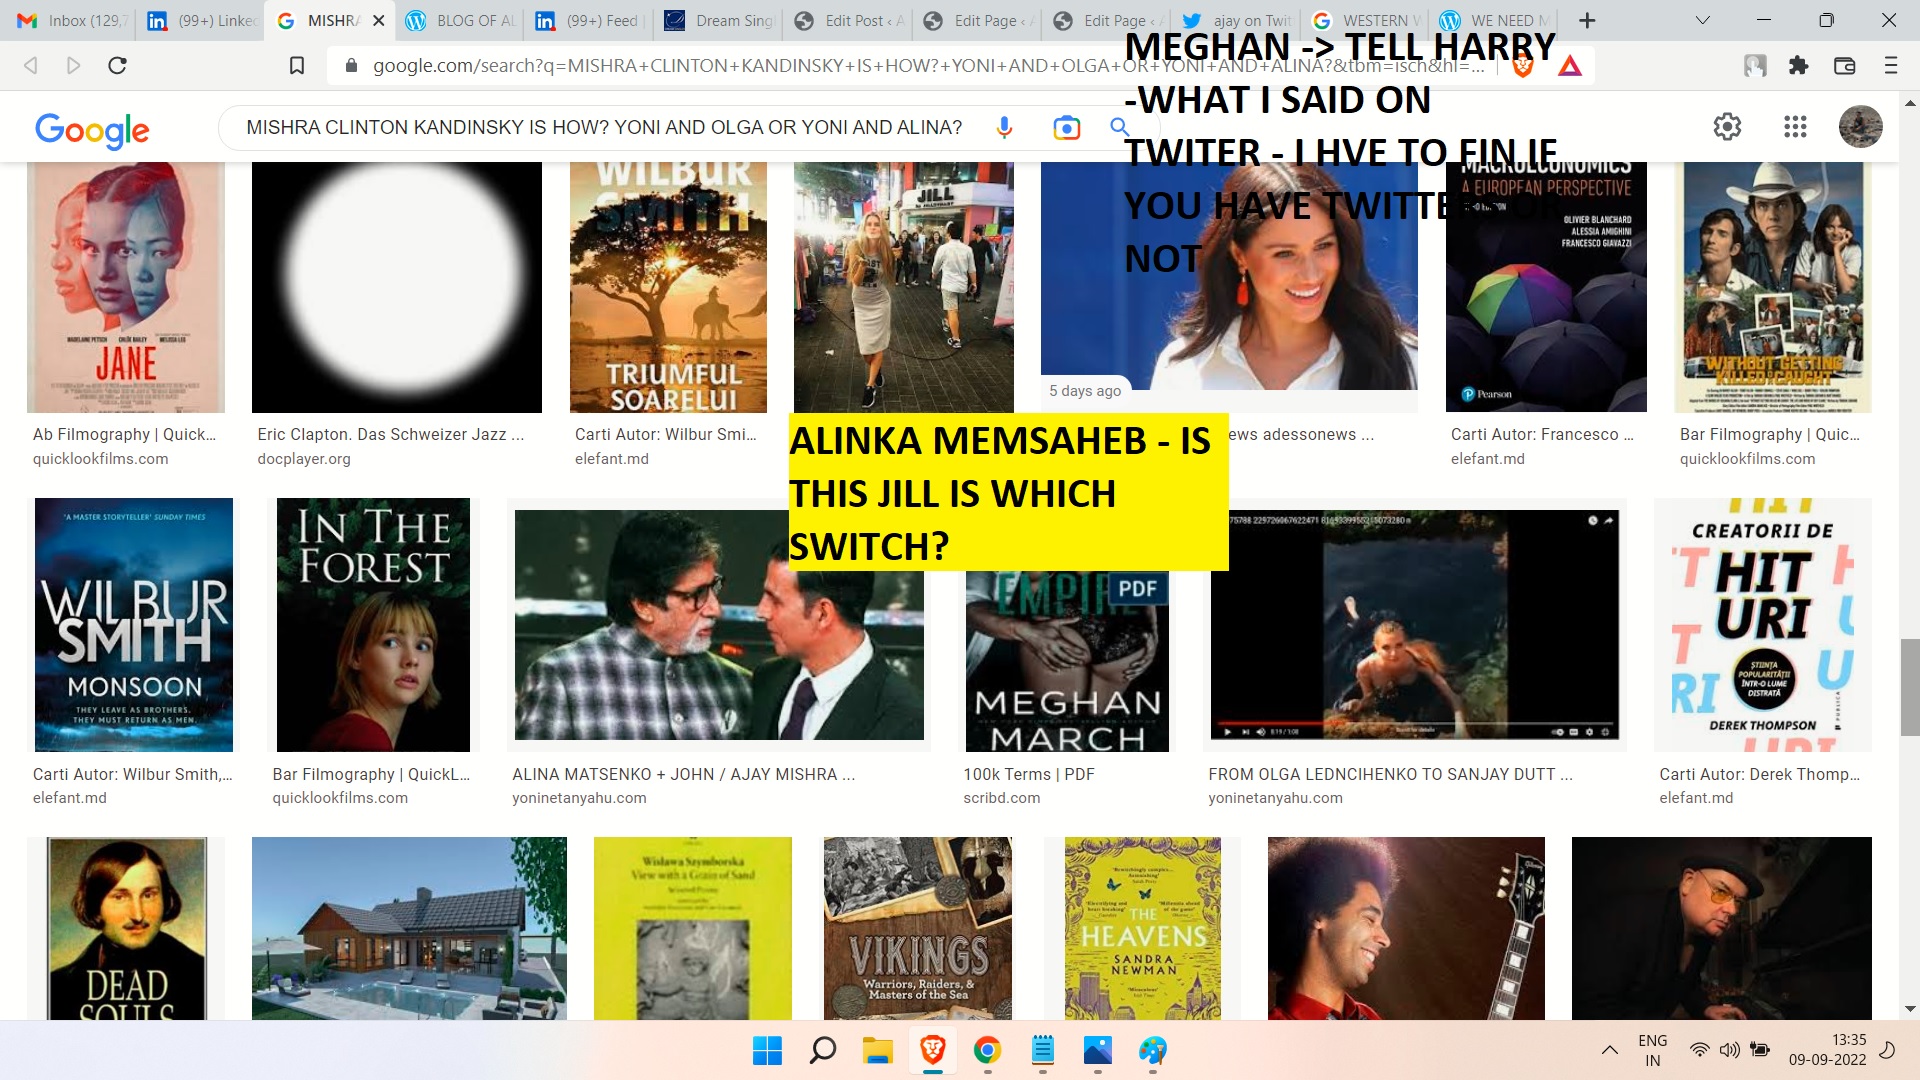 MISHRA CLINTON KANDISNKY IS HOW - ANSWER IS YONI NETANYAHU AND ALAINA AND NOW SU,NDAR PICHAI AND GOOGLE THIS IS LAST TIME DONT CHNAGE YOUR IMAGES BECASSED ON WHAT THEY DECIDE WHAT I SAID